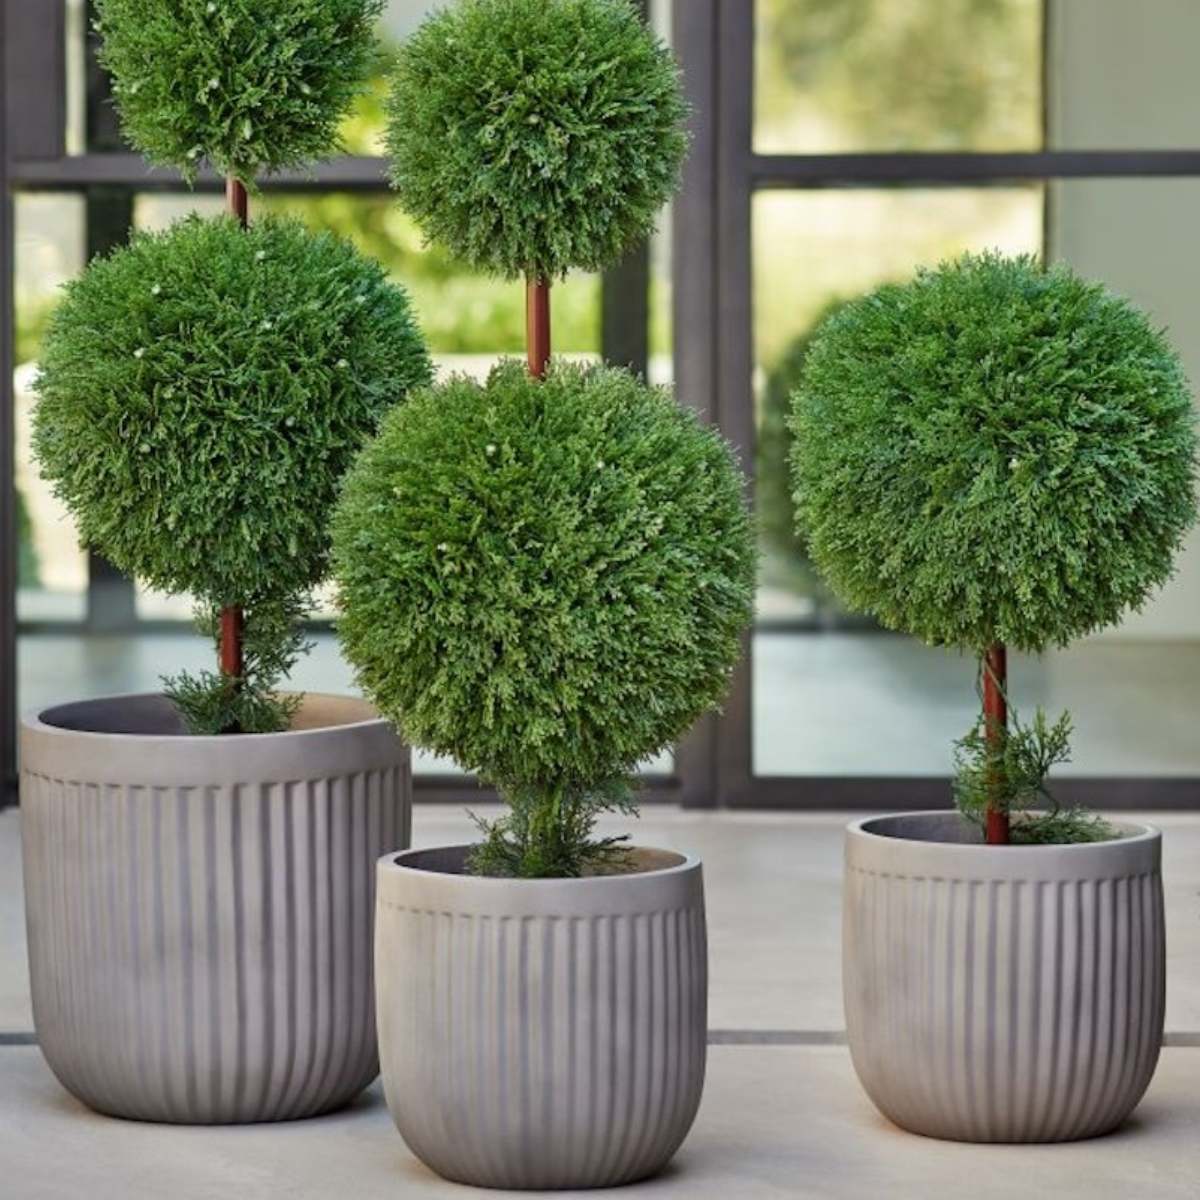 How To Make Artificial Greenery For Display